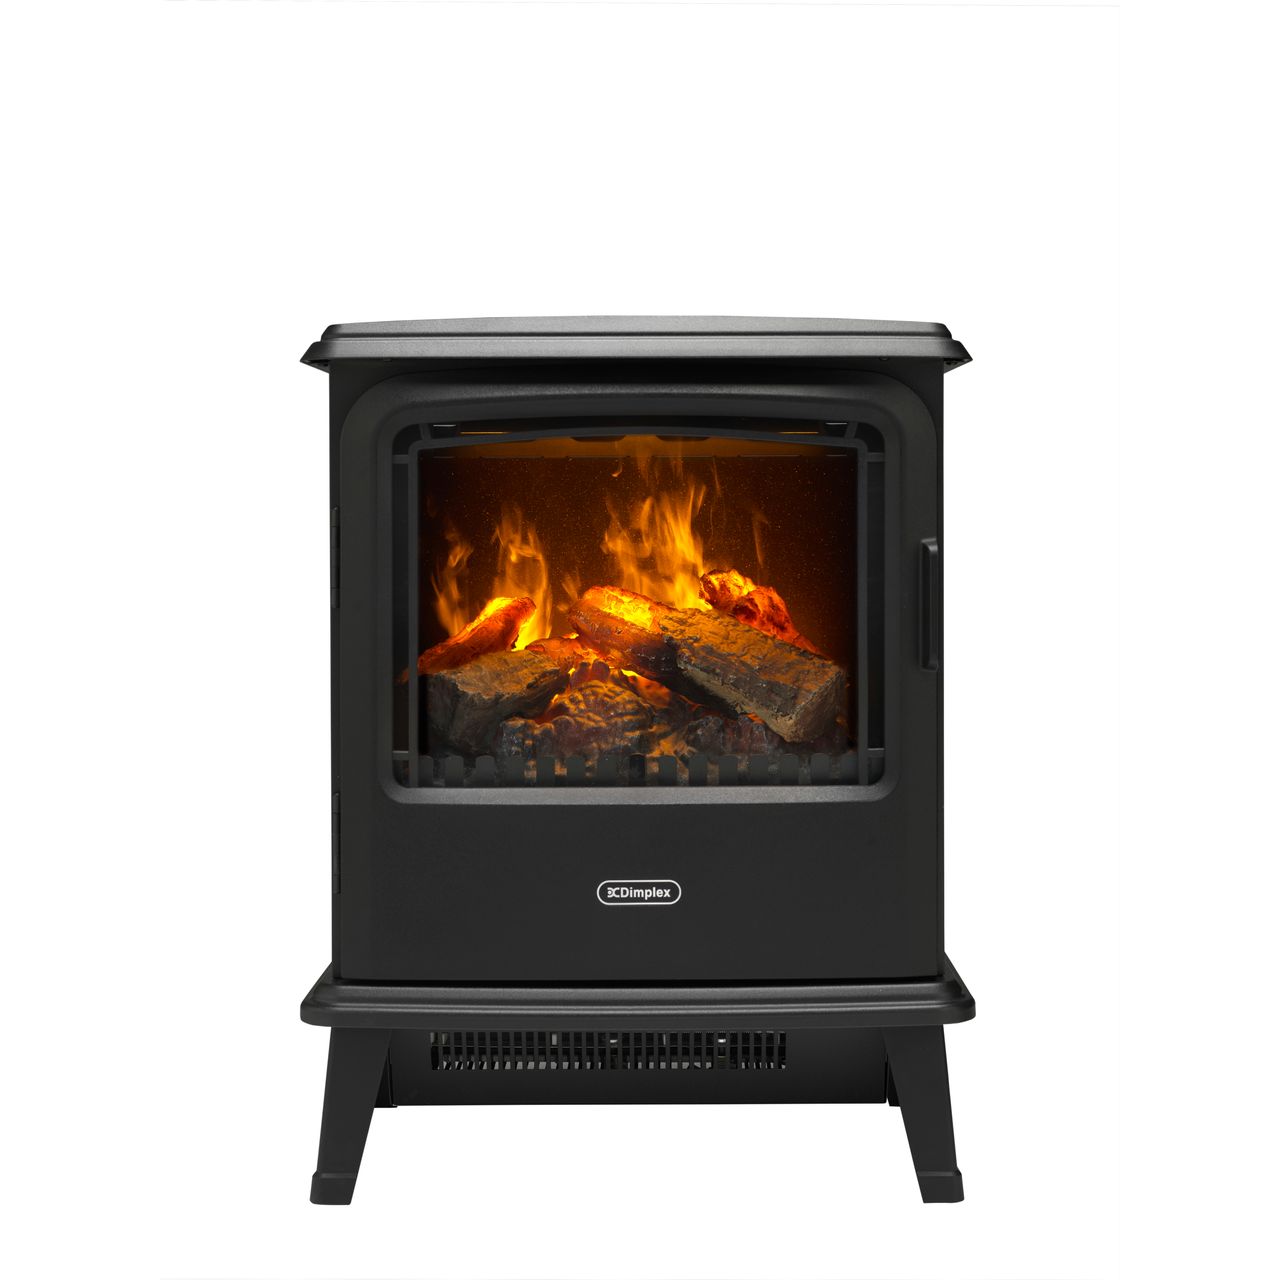 Dimplex Bayport BYP20 Log Effect Electric Stove With Remote Control Review